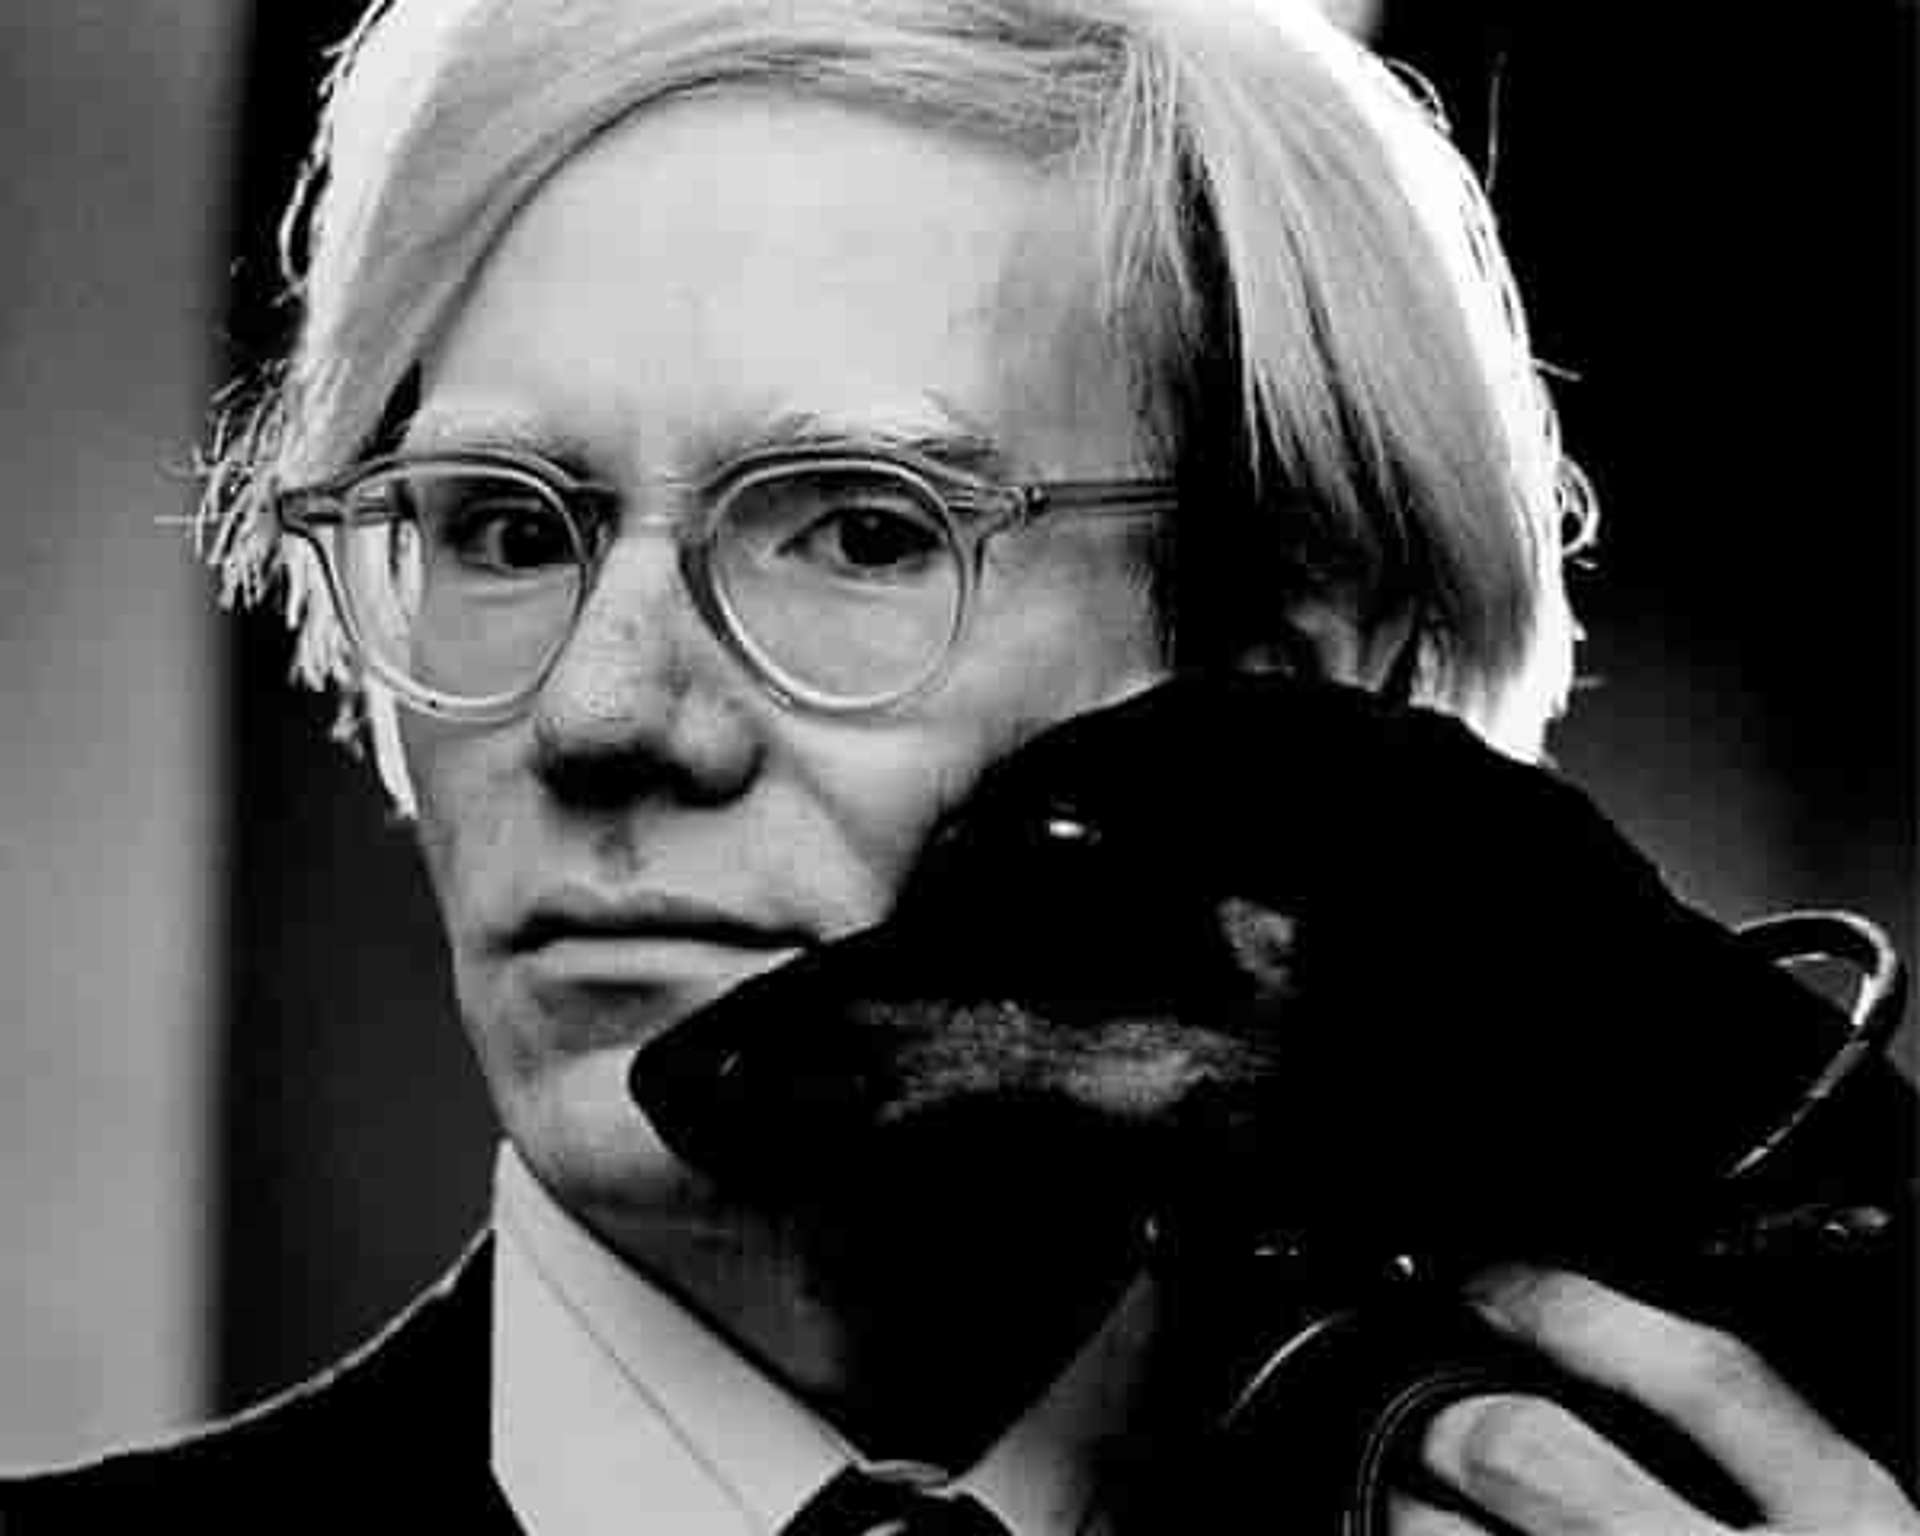 Andy Warhol’s Estate Loses Supreme Court Copyright Case